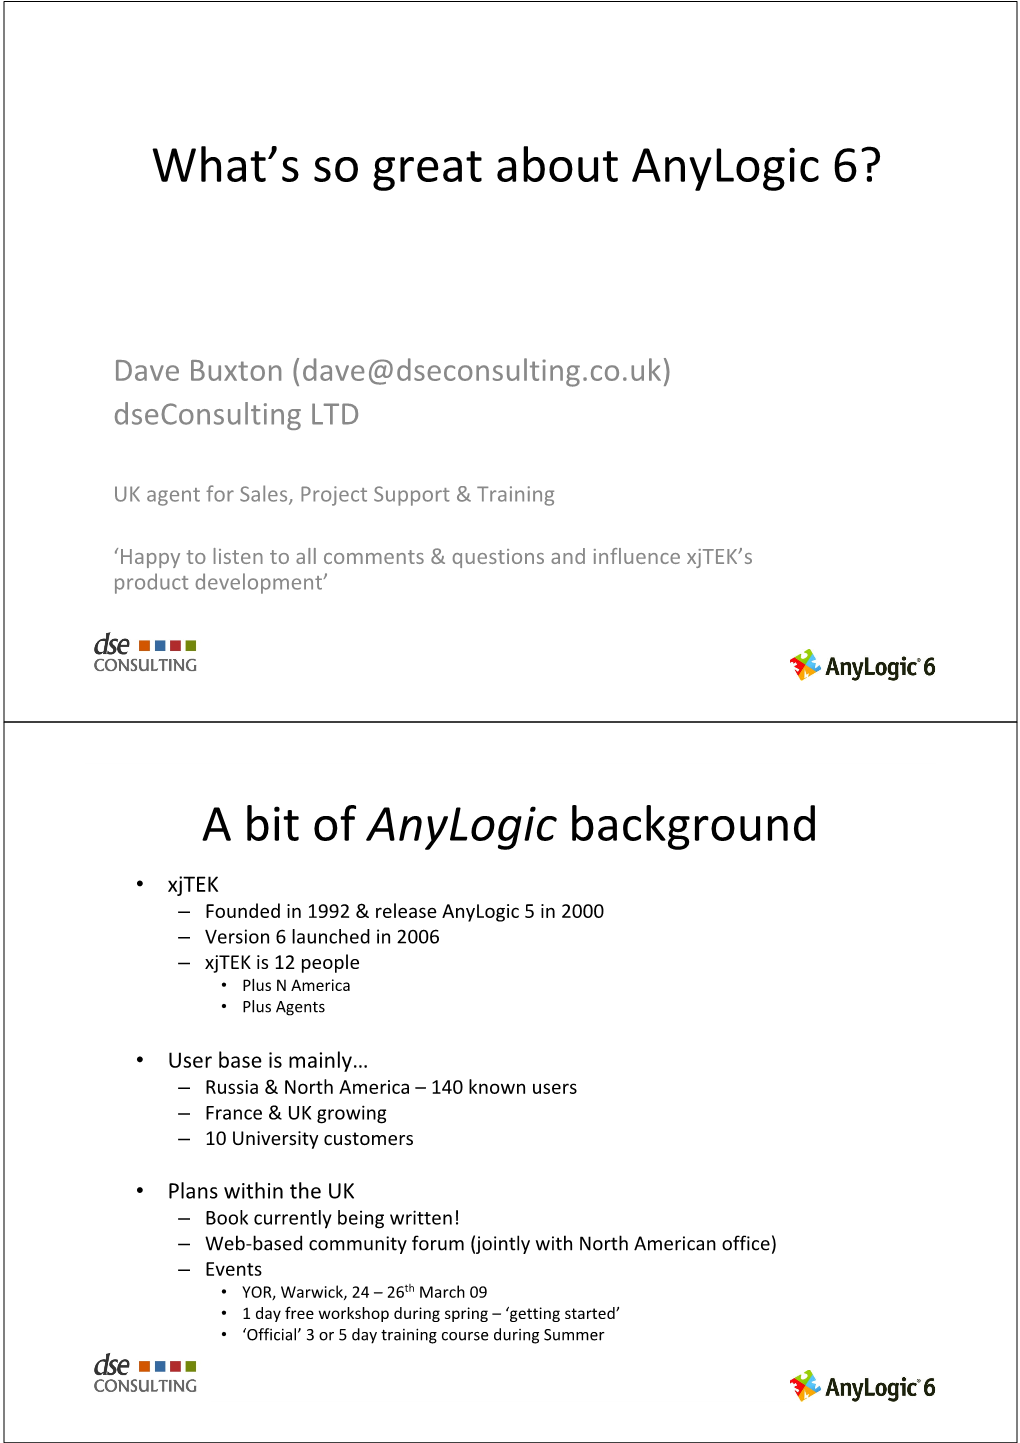 What's So Great About Anylogic 6? a Bit of Anylogic Background